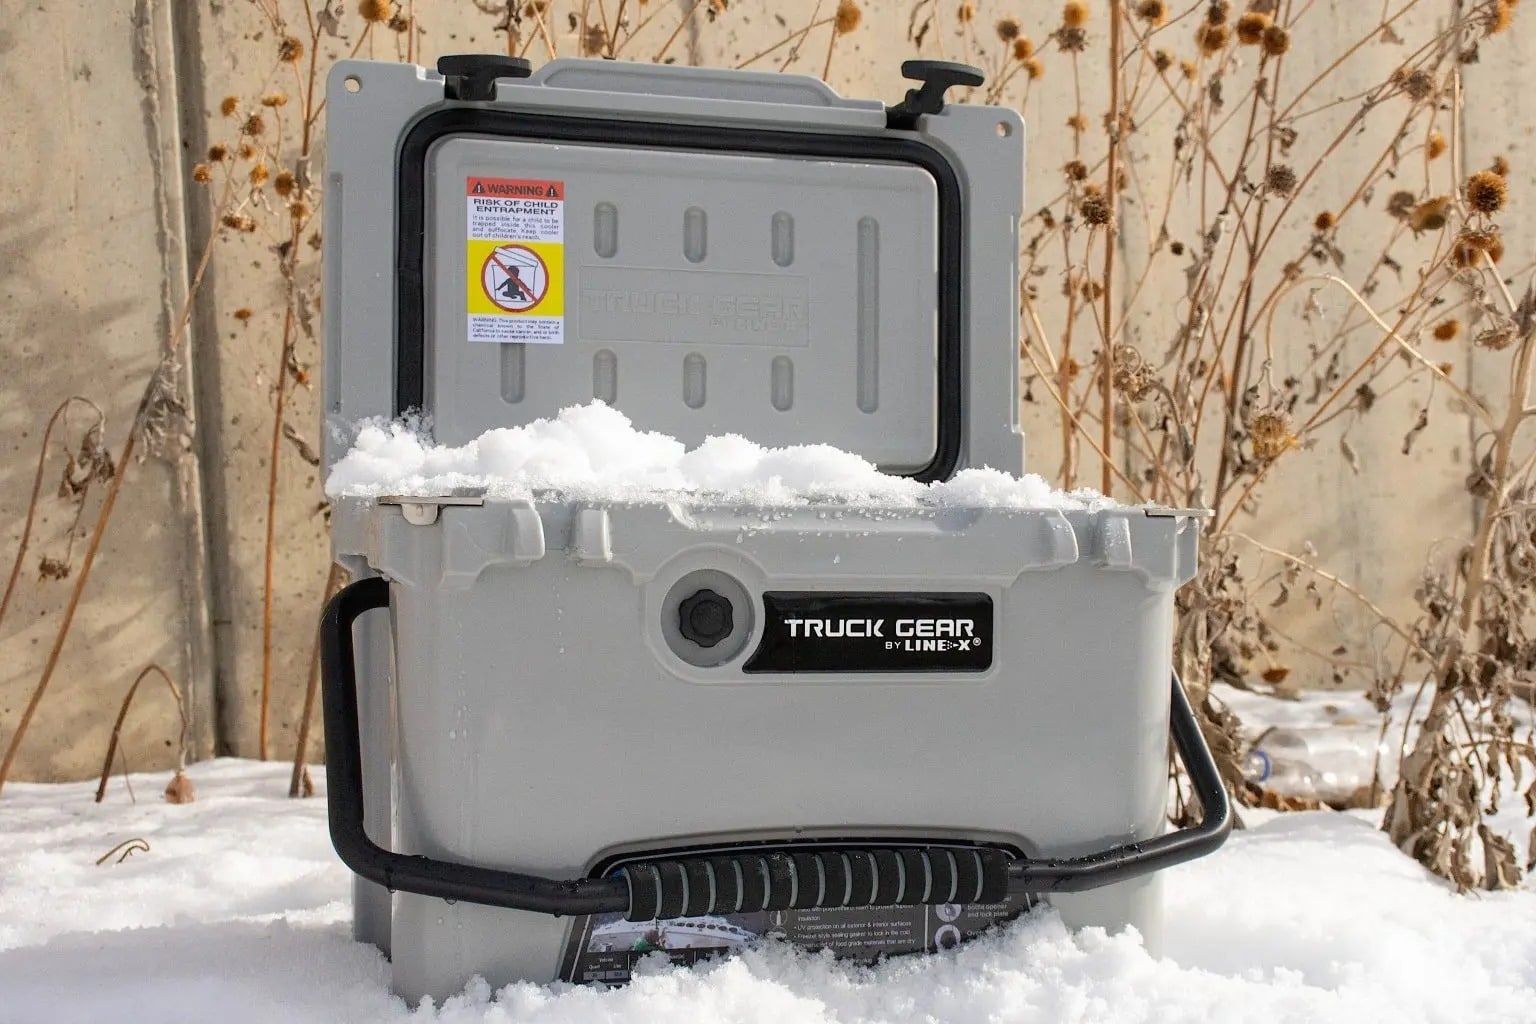 Truck Gear Line-X Expedition Cooler with snow.